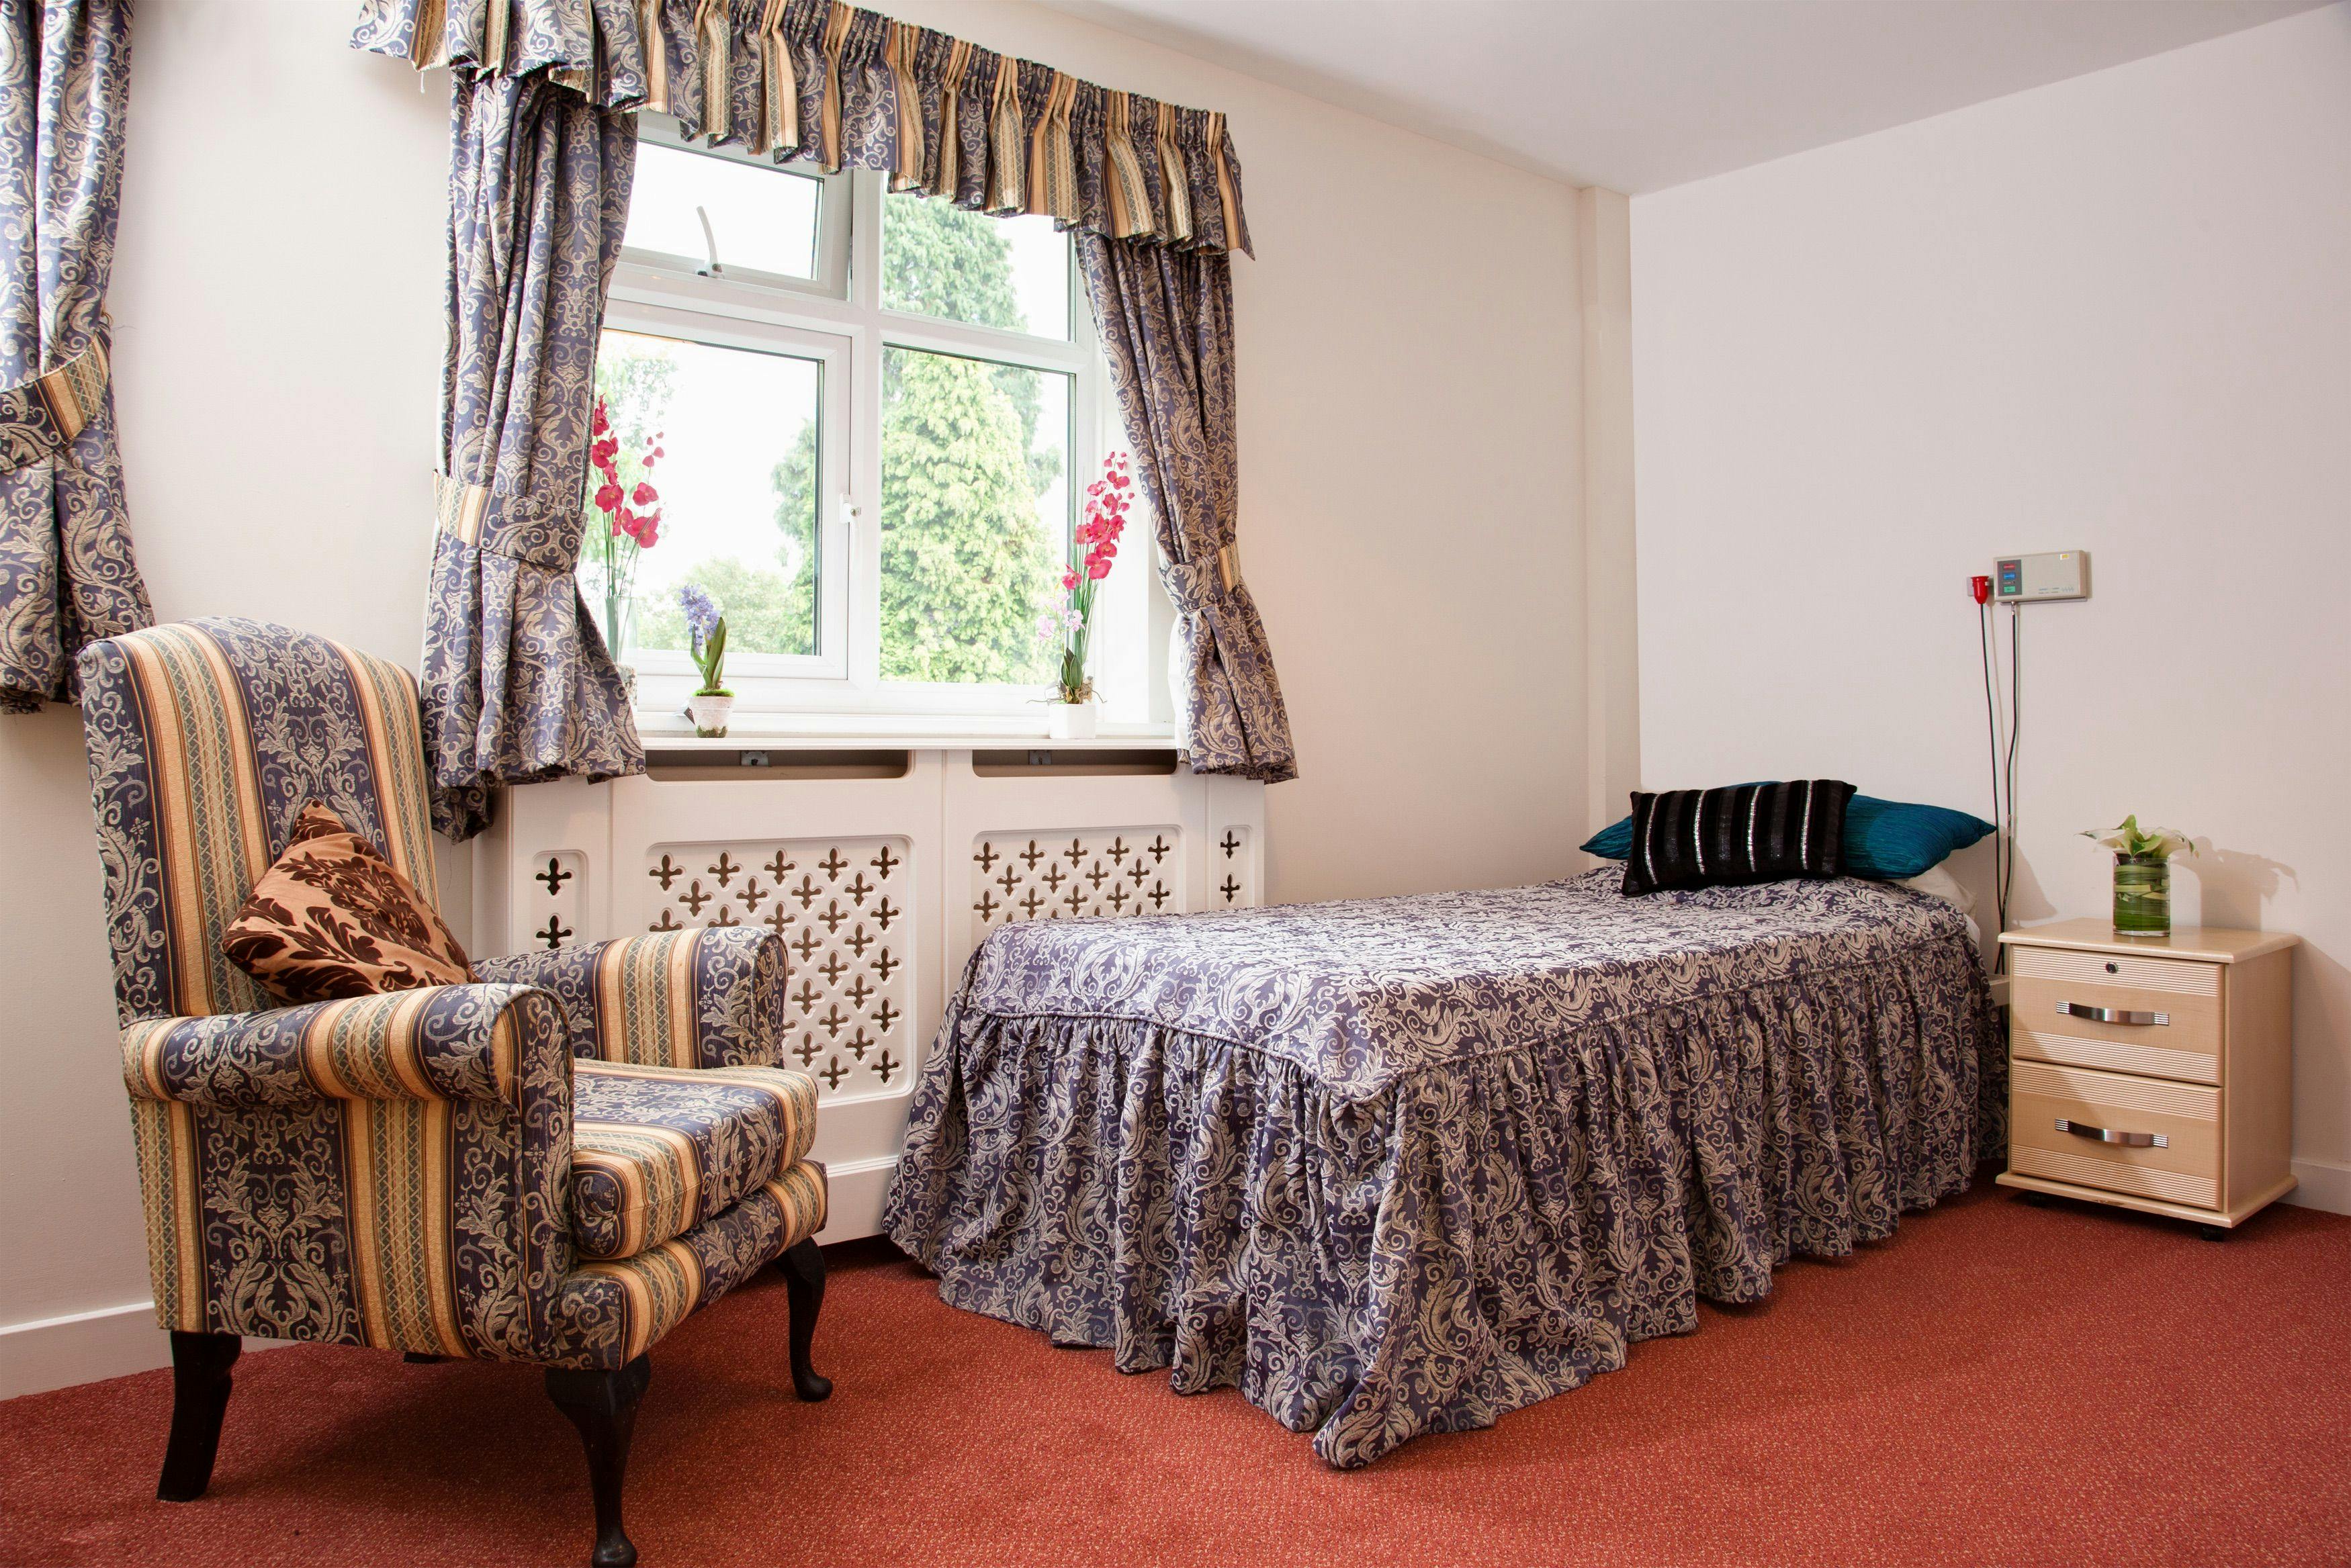 Surrey Hills Care Home in Wormley 5